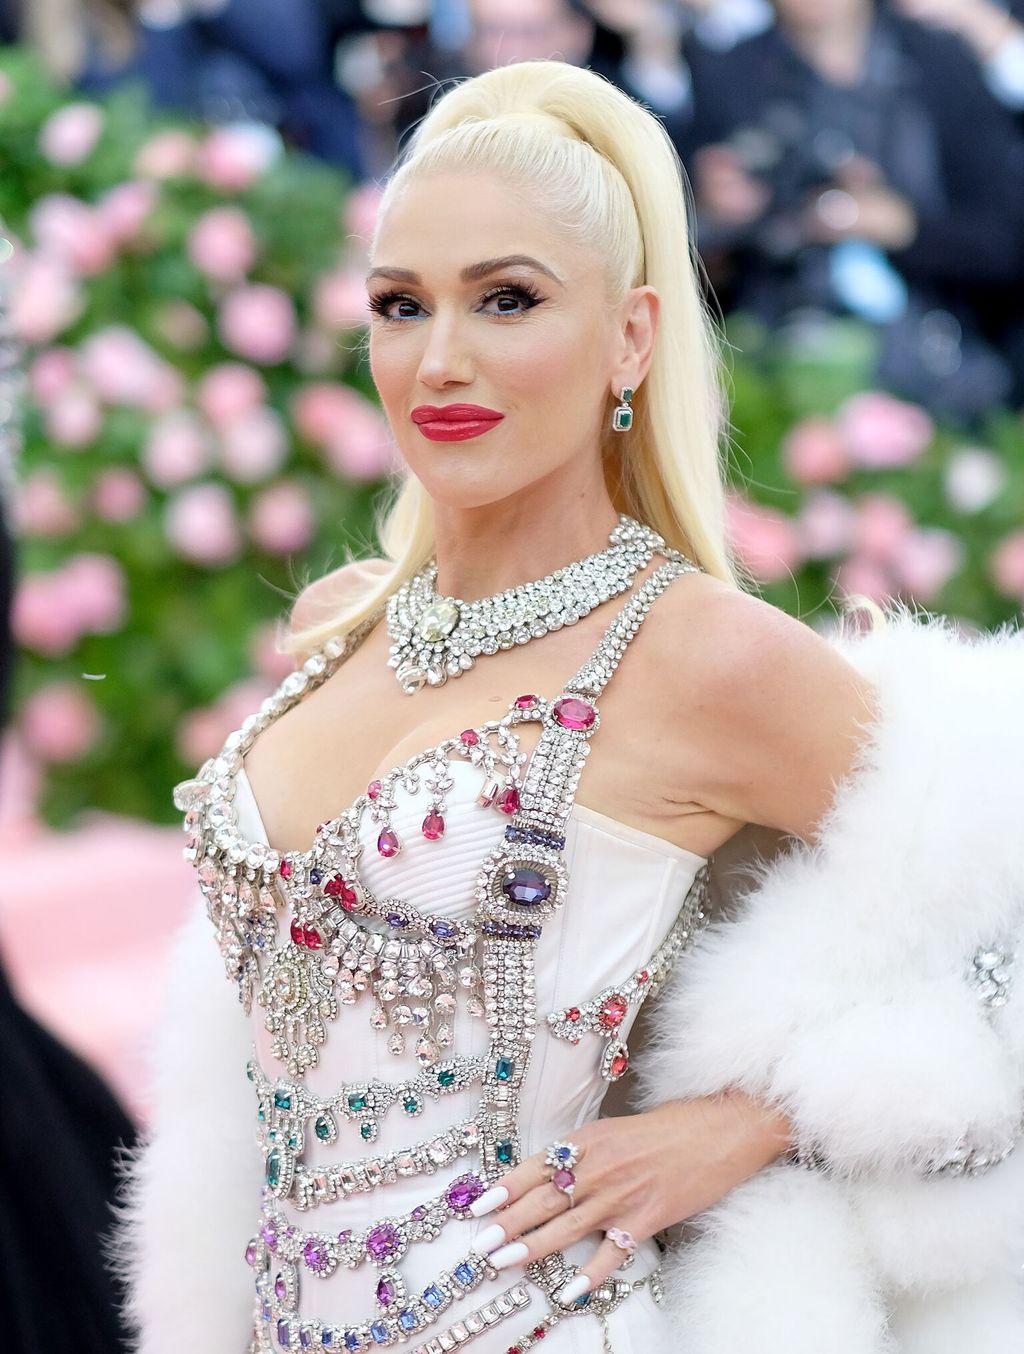 Gwen Stefani attends The 2019 Met Gala Celebrating Camp: Notes on Fashion at Metropolitan Museum of Art | Getty Images